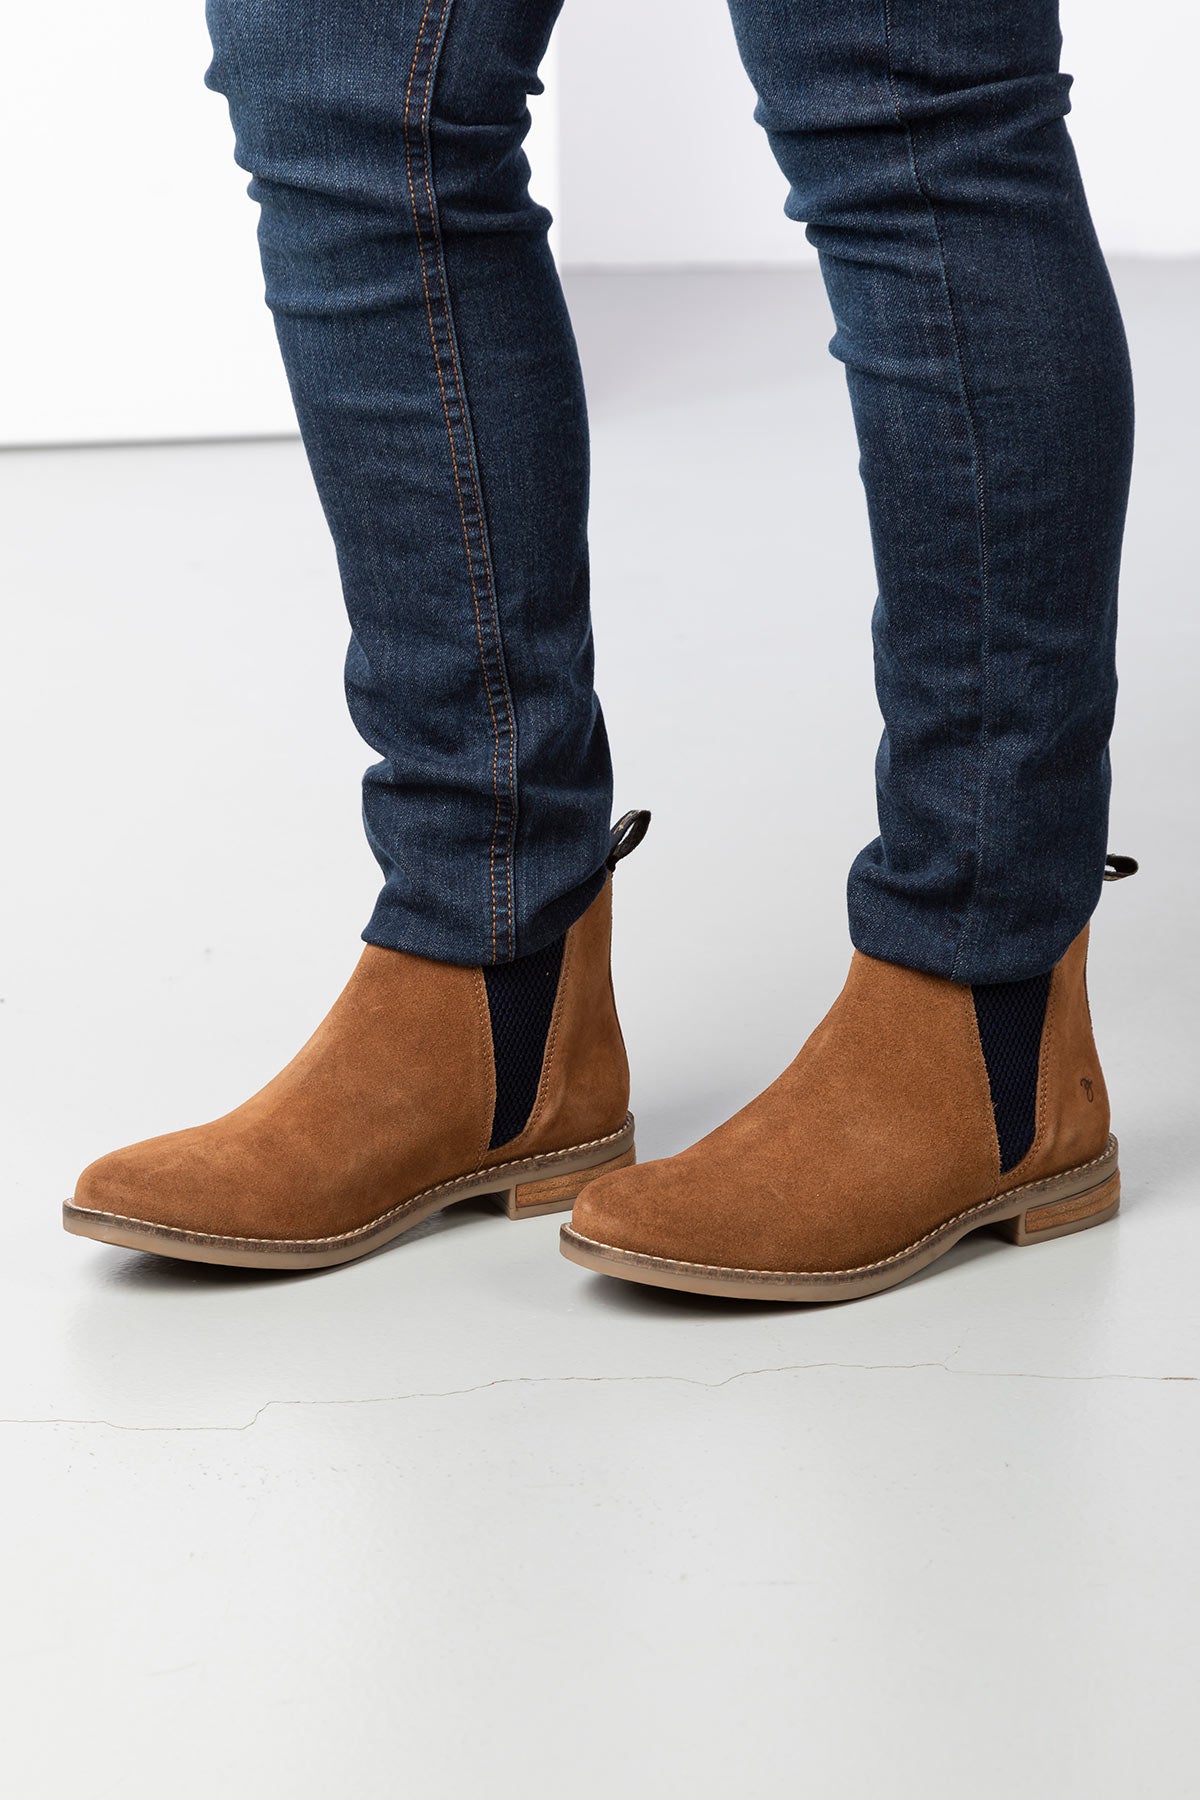 Ladies Suede Chelsea Ankle Boots UK | Rydale